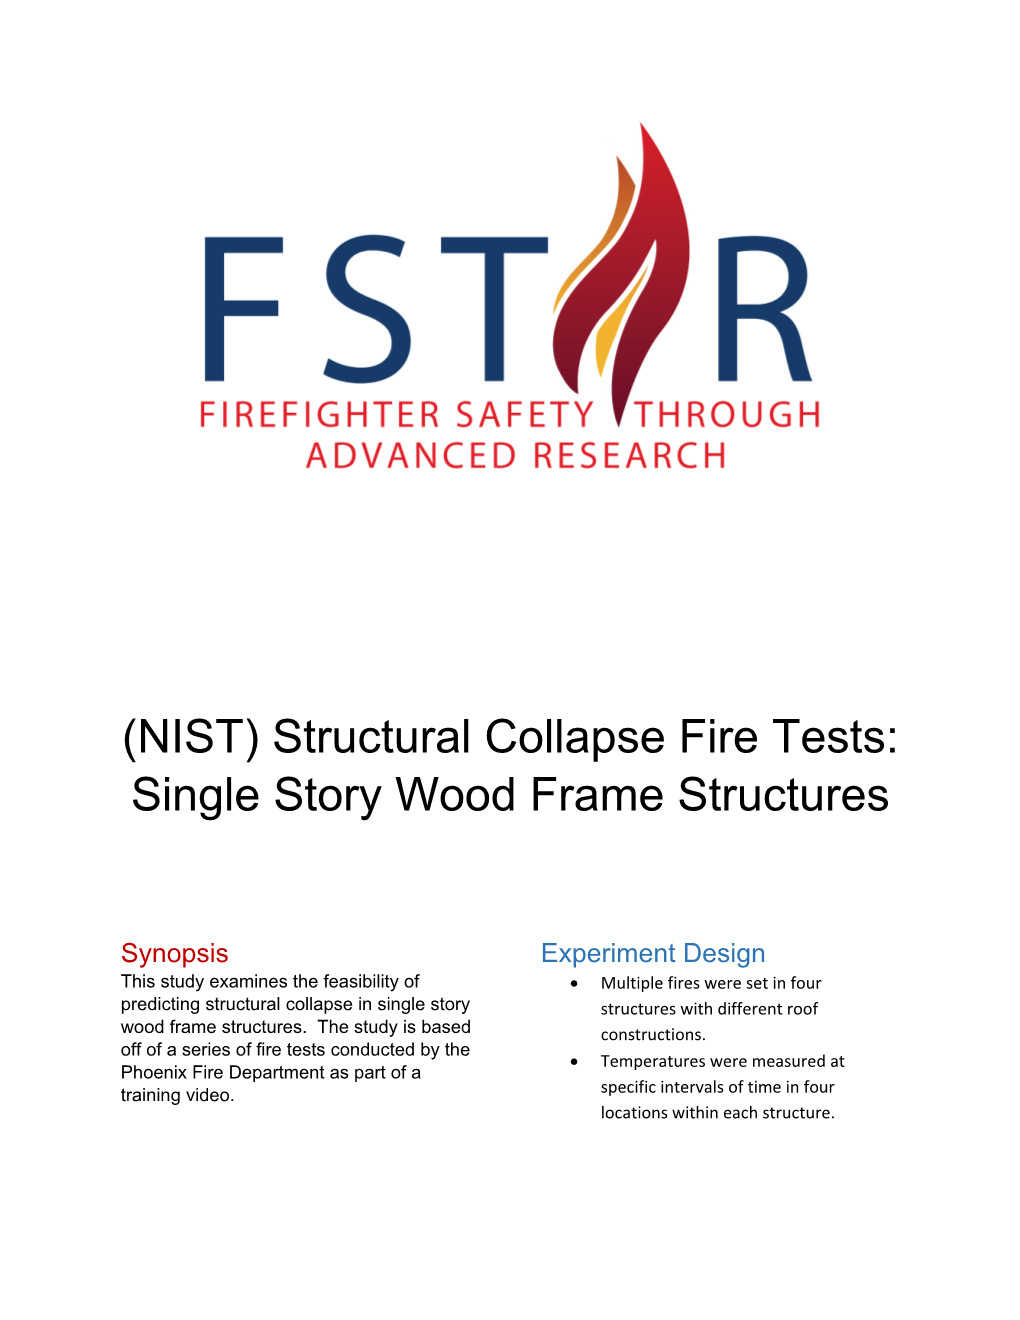 (NIST) Structural Collapse Fire Tests: Single Story Wood Frame Structures